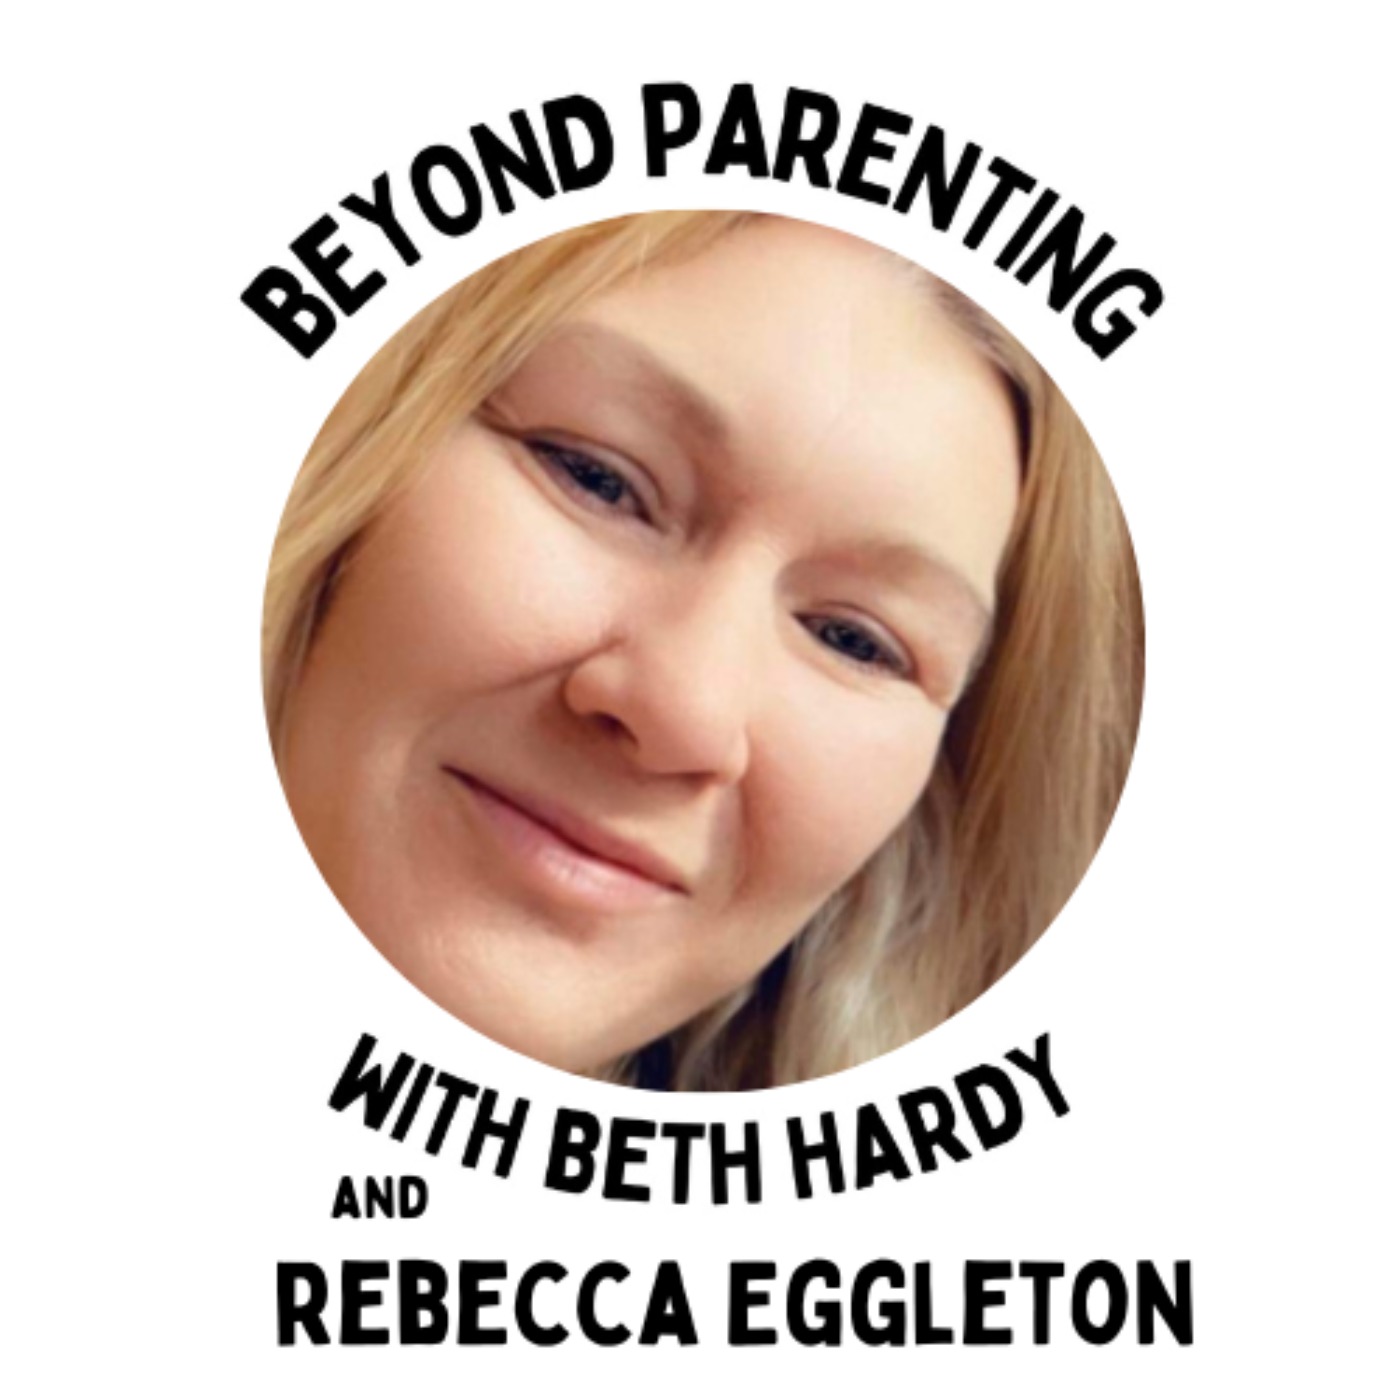 Being A Single Parent - With Rebecca Eggleton